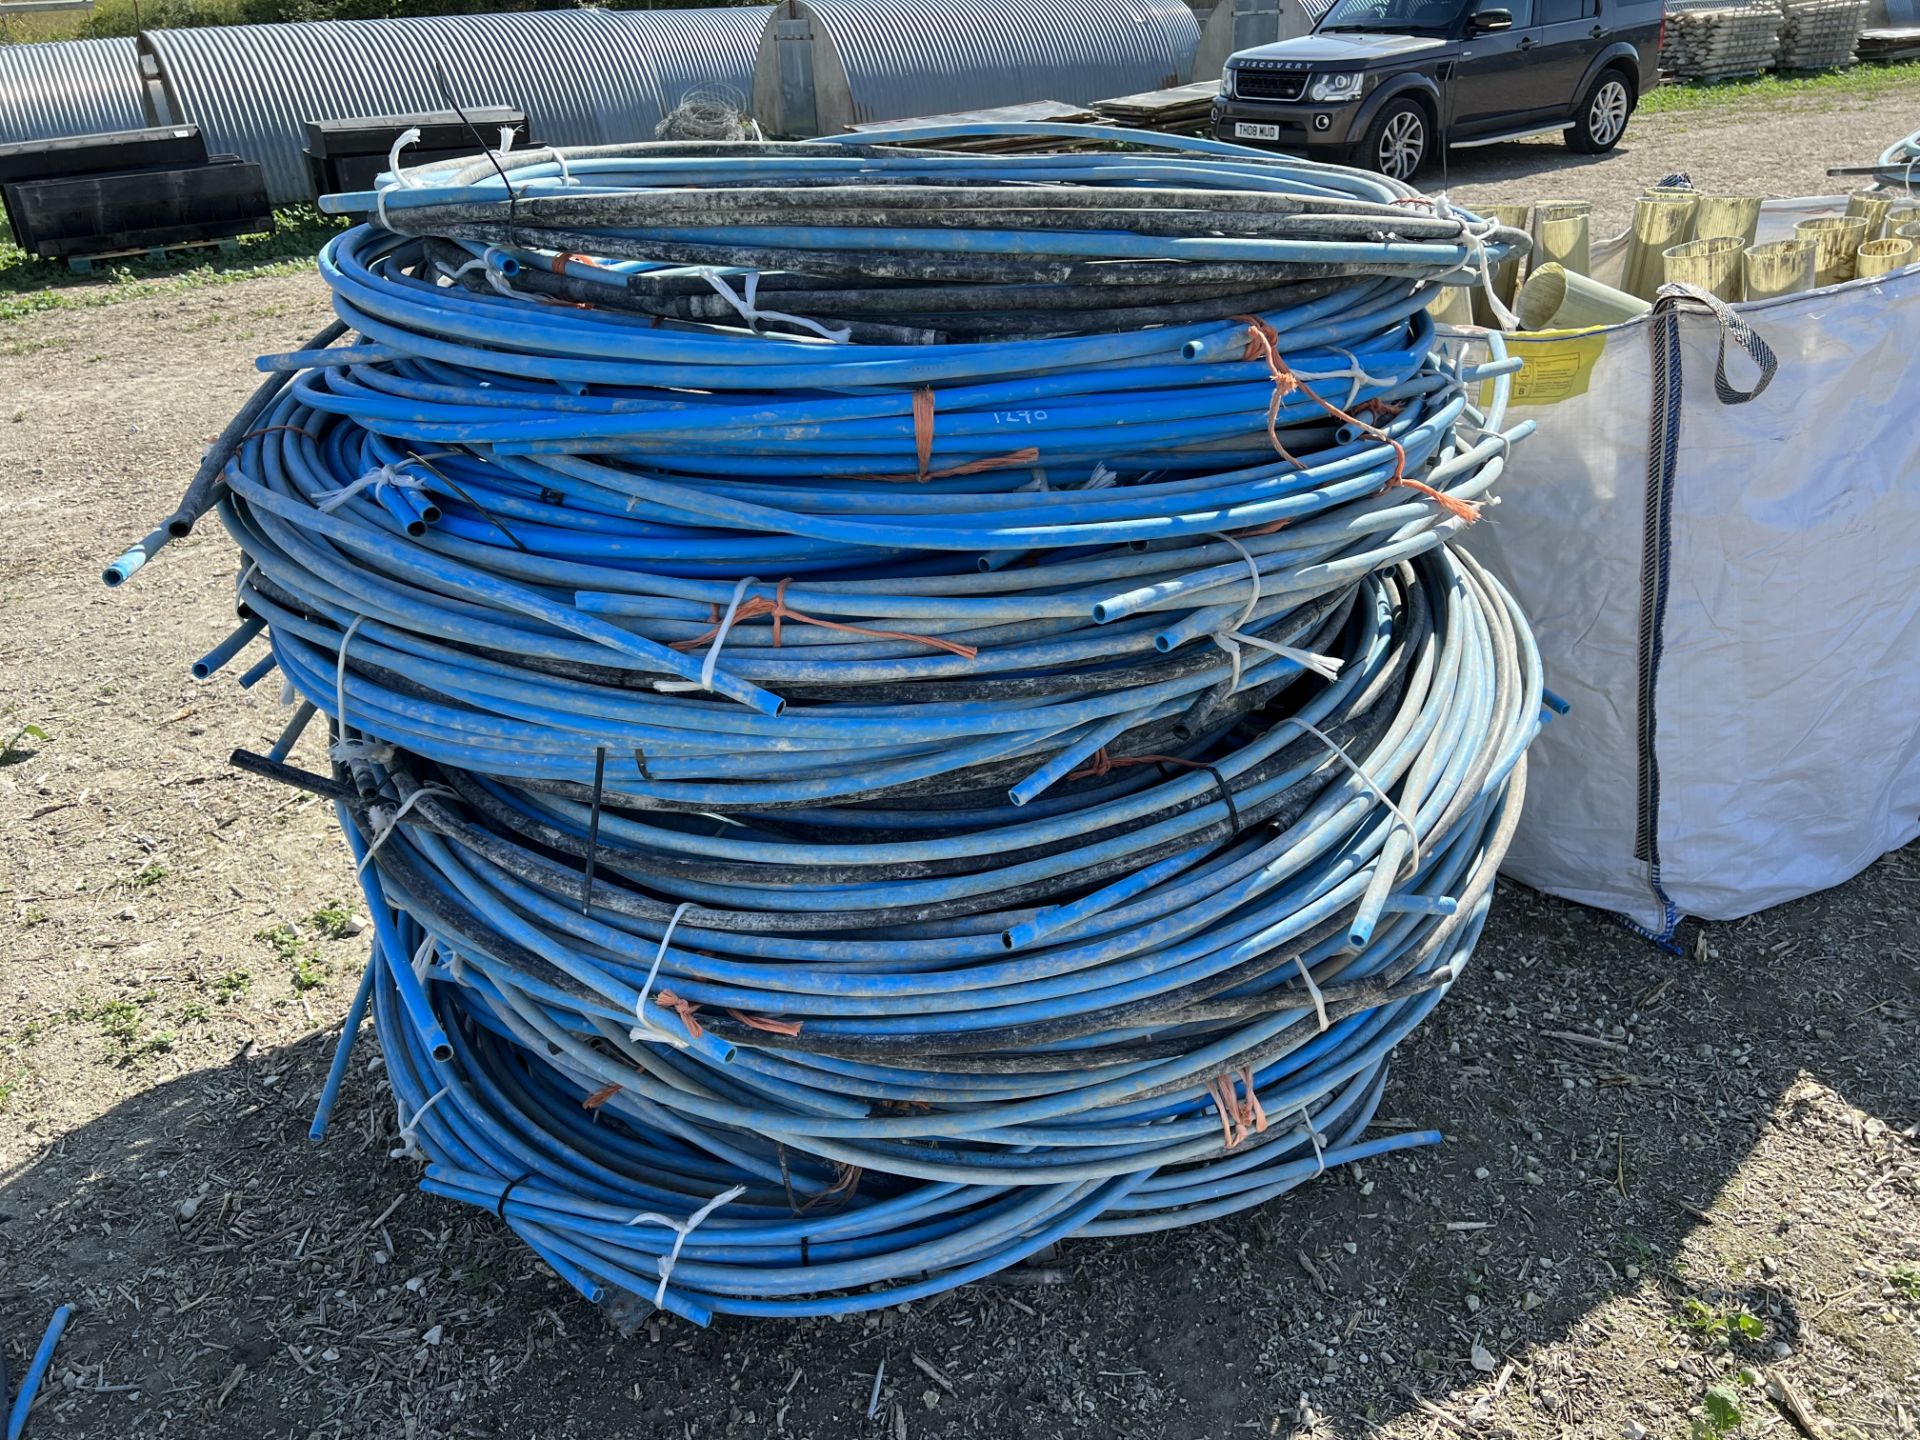 Large quantity of water pipe